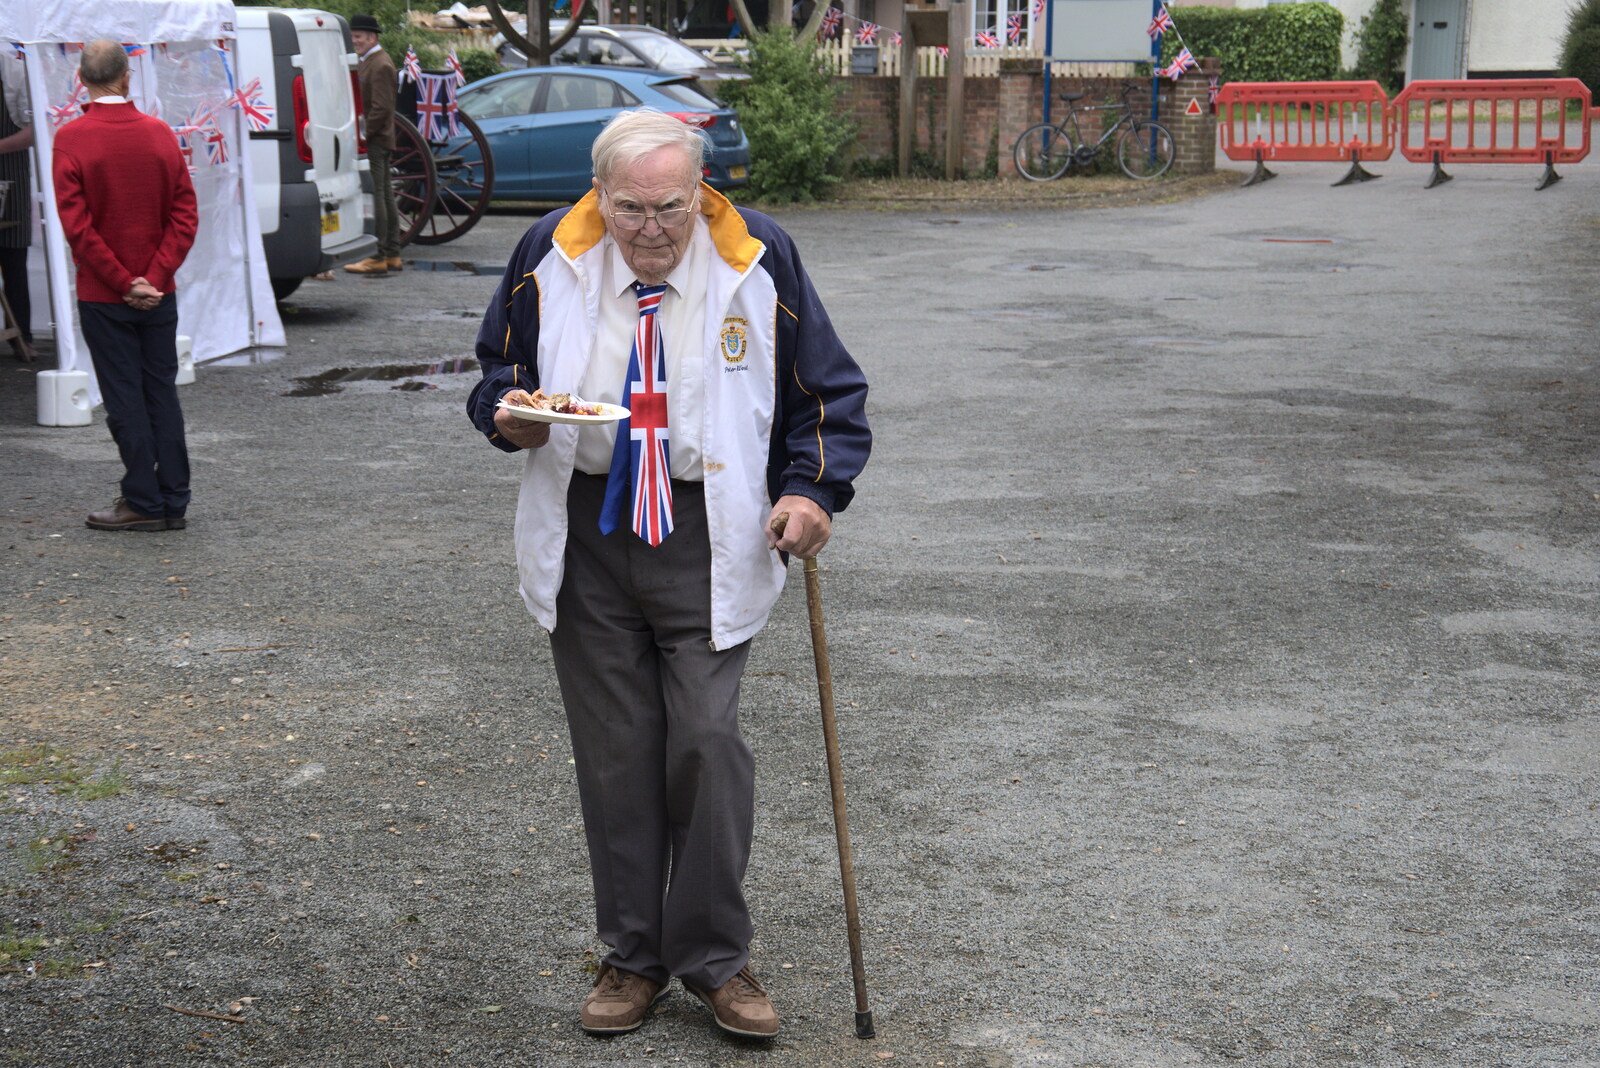 Platinum Jubilee Sunday in Palgrave, Brome and Coney Weston - 5th June 2022: A nice line in Union flag ties is on display